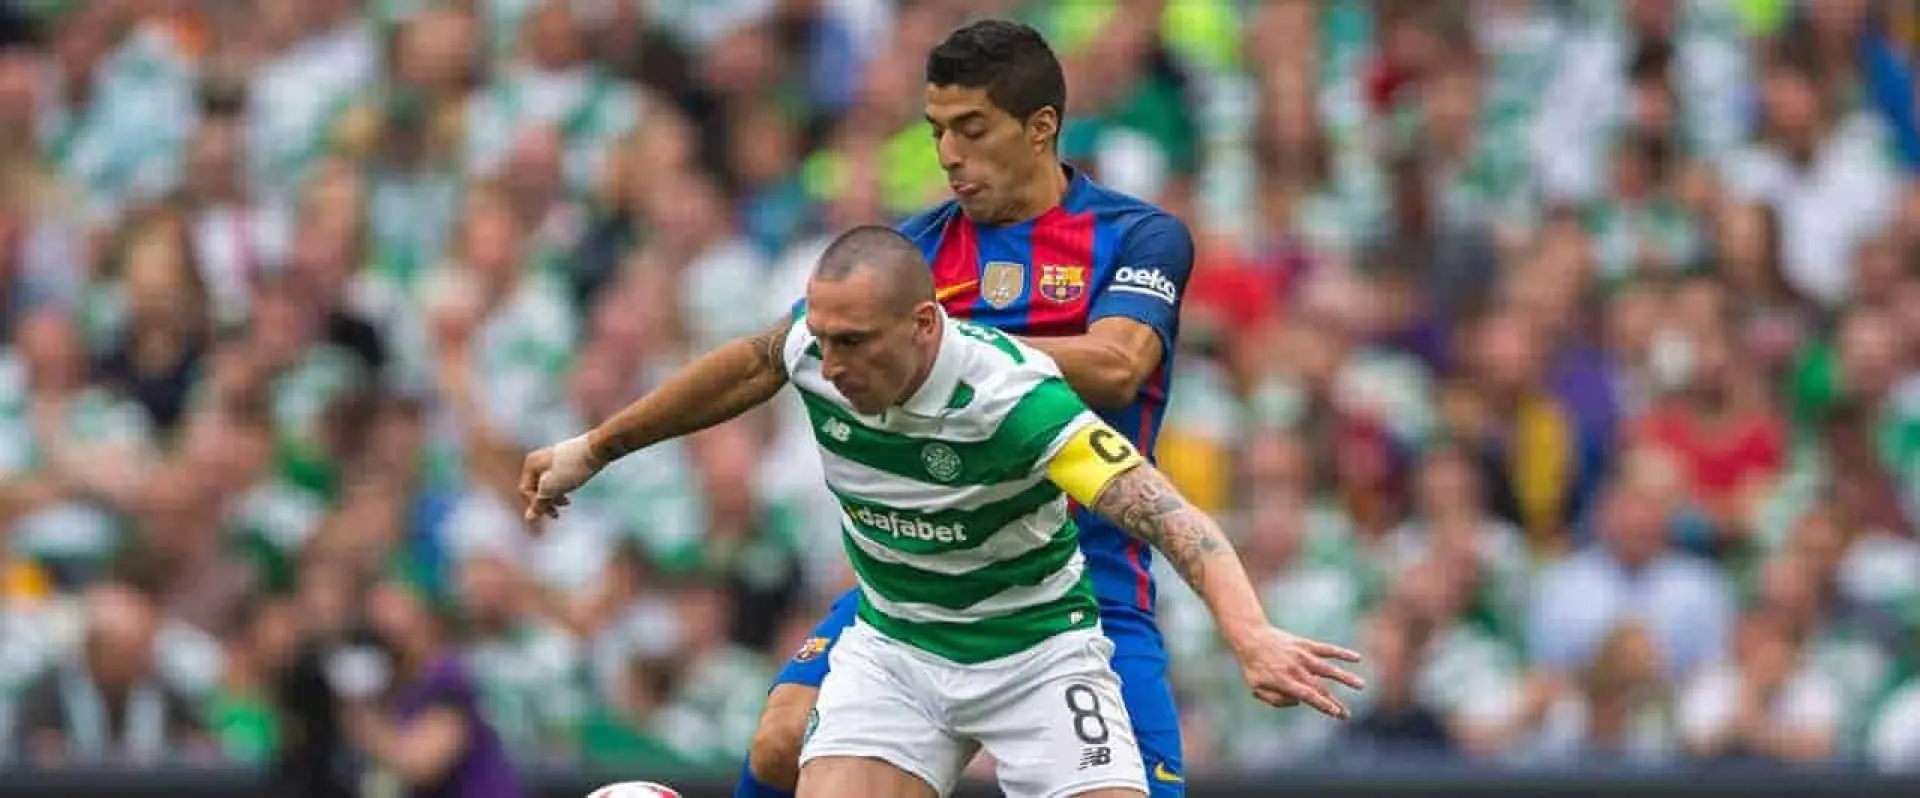 Barcelona v Celtic features in our five Champions League group stage tips for September 13.